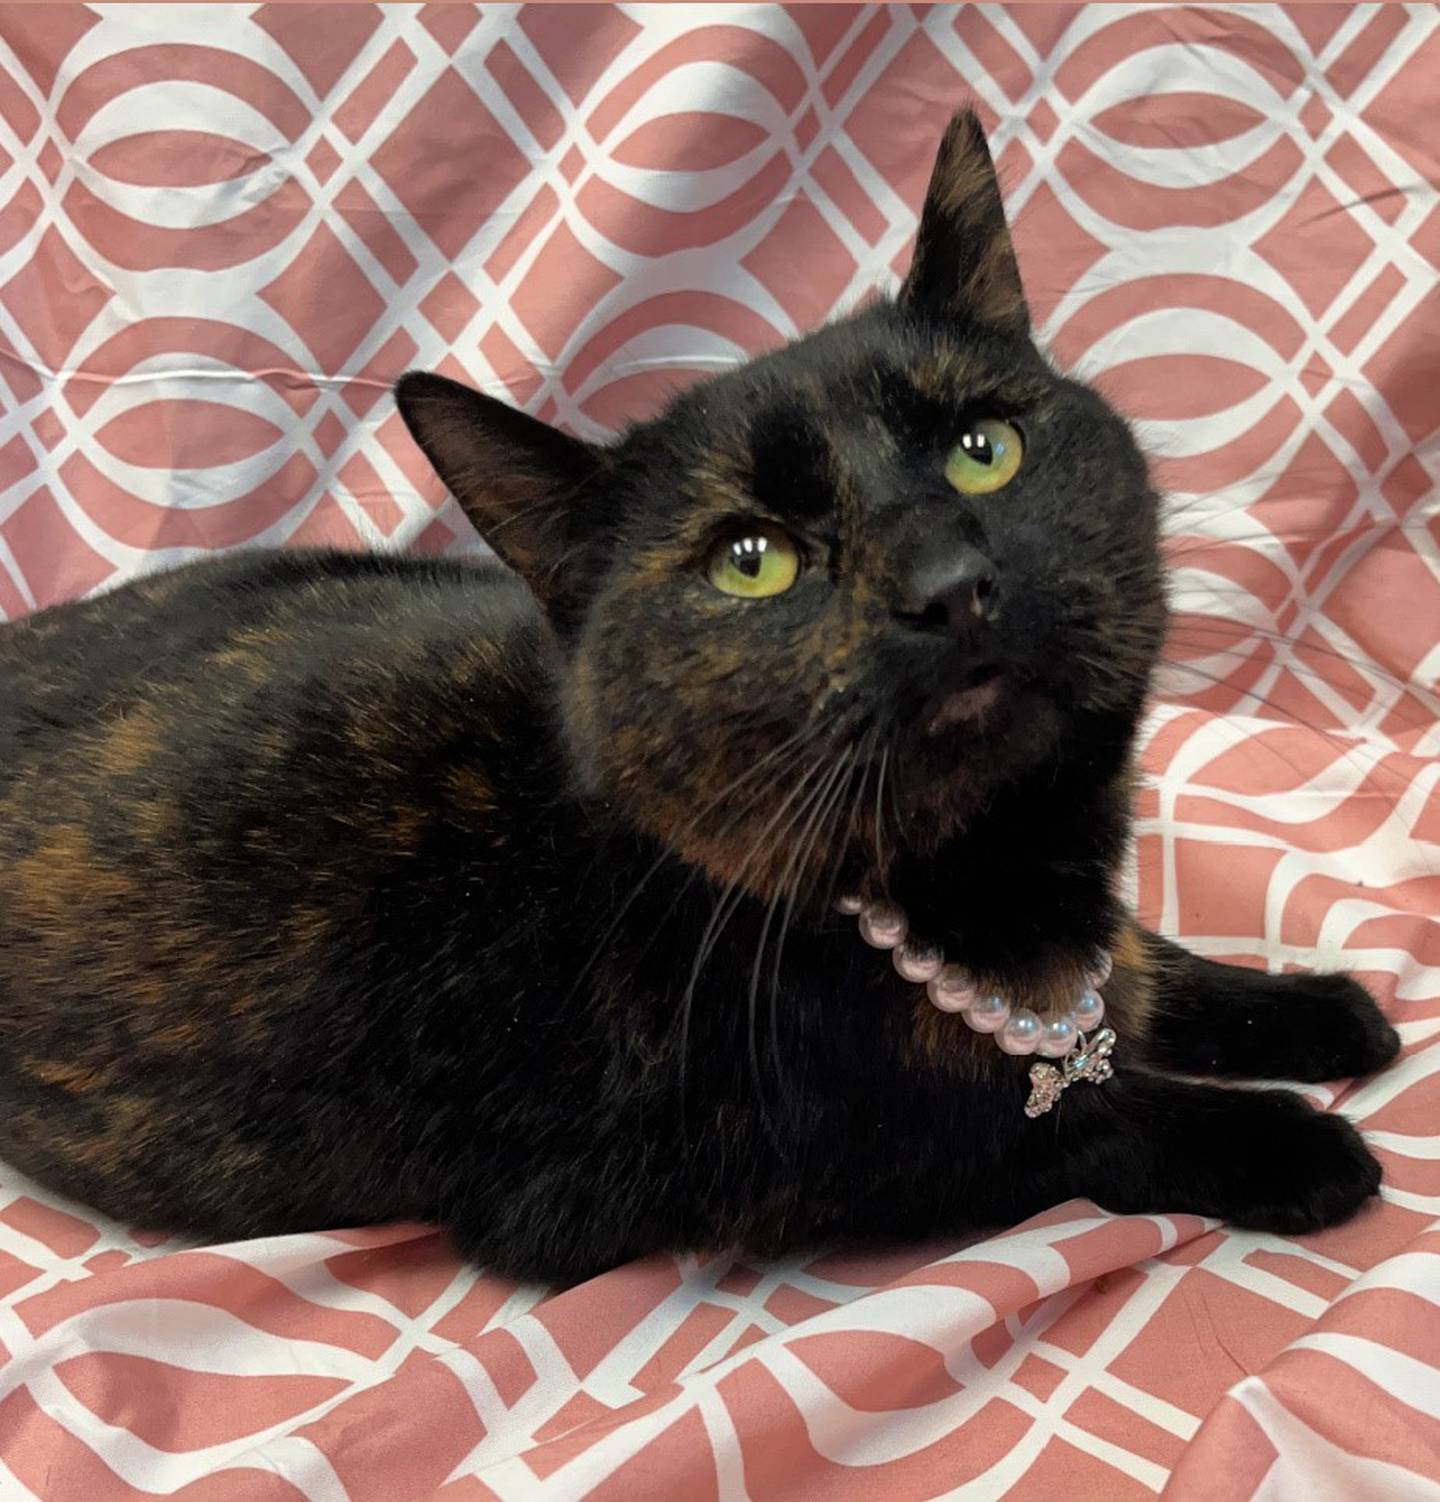 Irina is a 5-year-old tortie that is quiet and keeps to herself. She’s very independent and will usually keep herself occupied – but she doesn’t mind being someone’s little shadow. To meet Irina, call Joliet Township Animal Control at 815-725-0333.